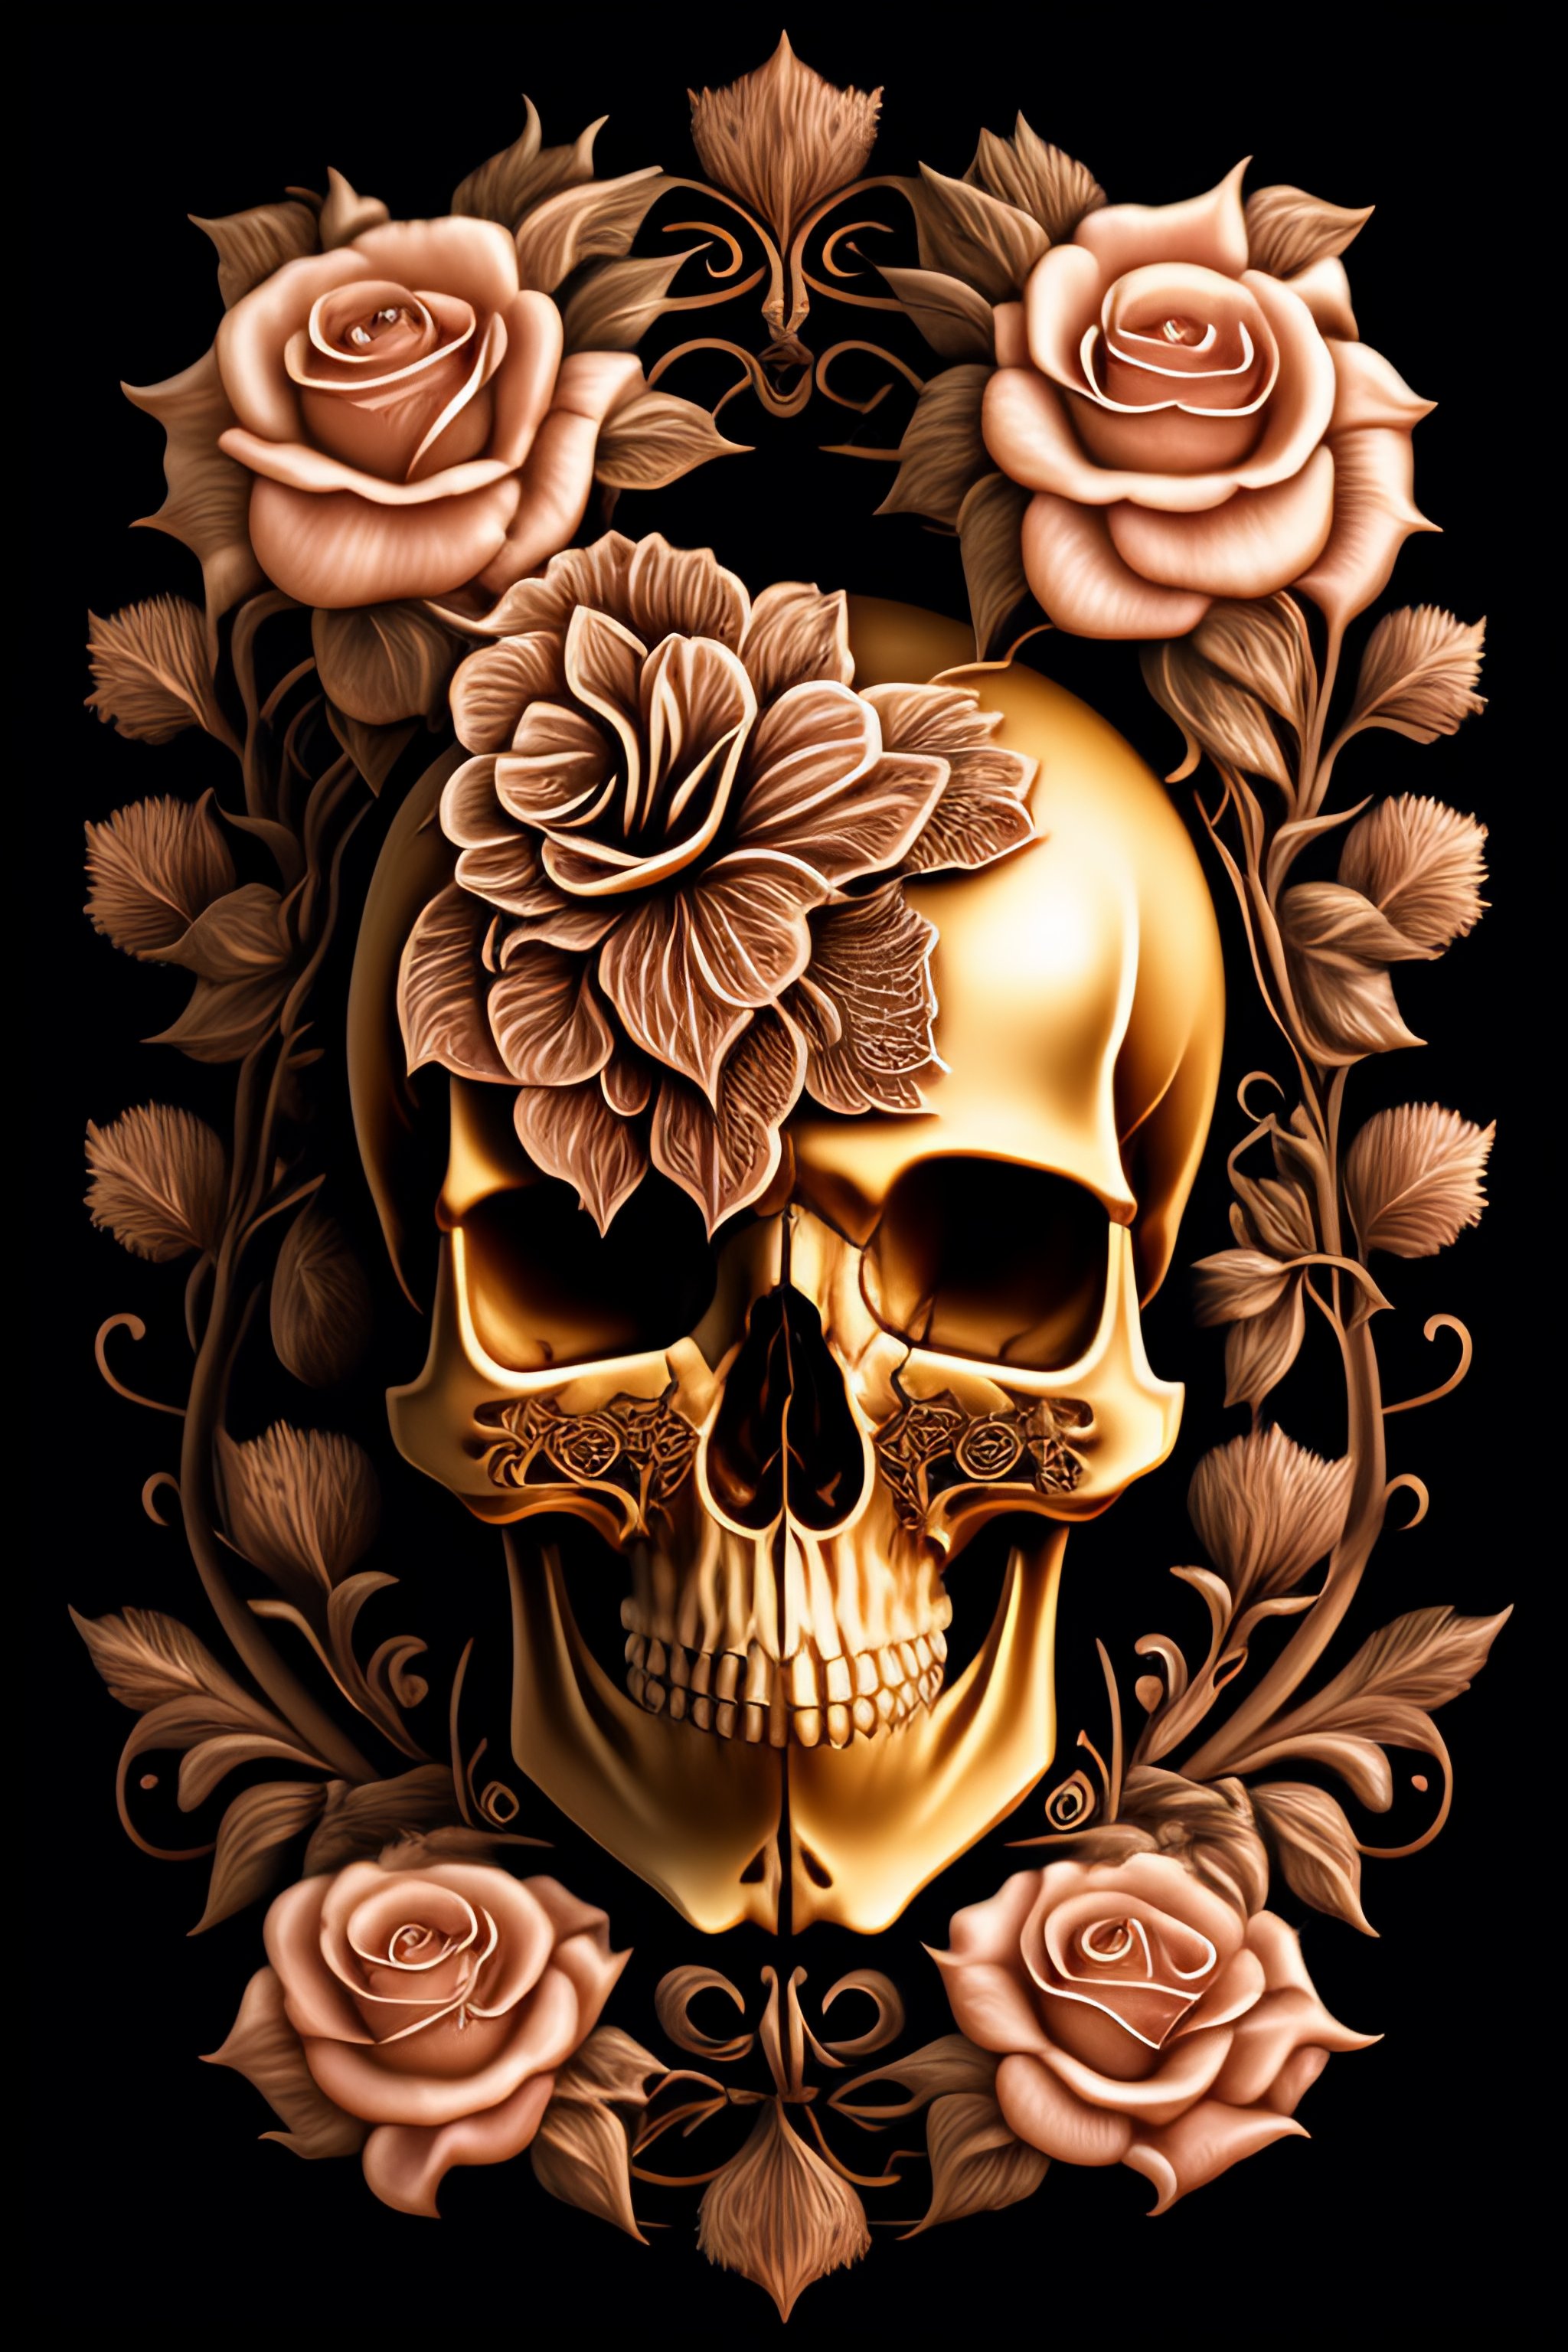 Lexica Fear Form Of Skull With Classical Floral Elements Emanating